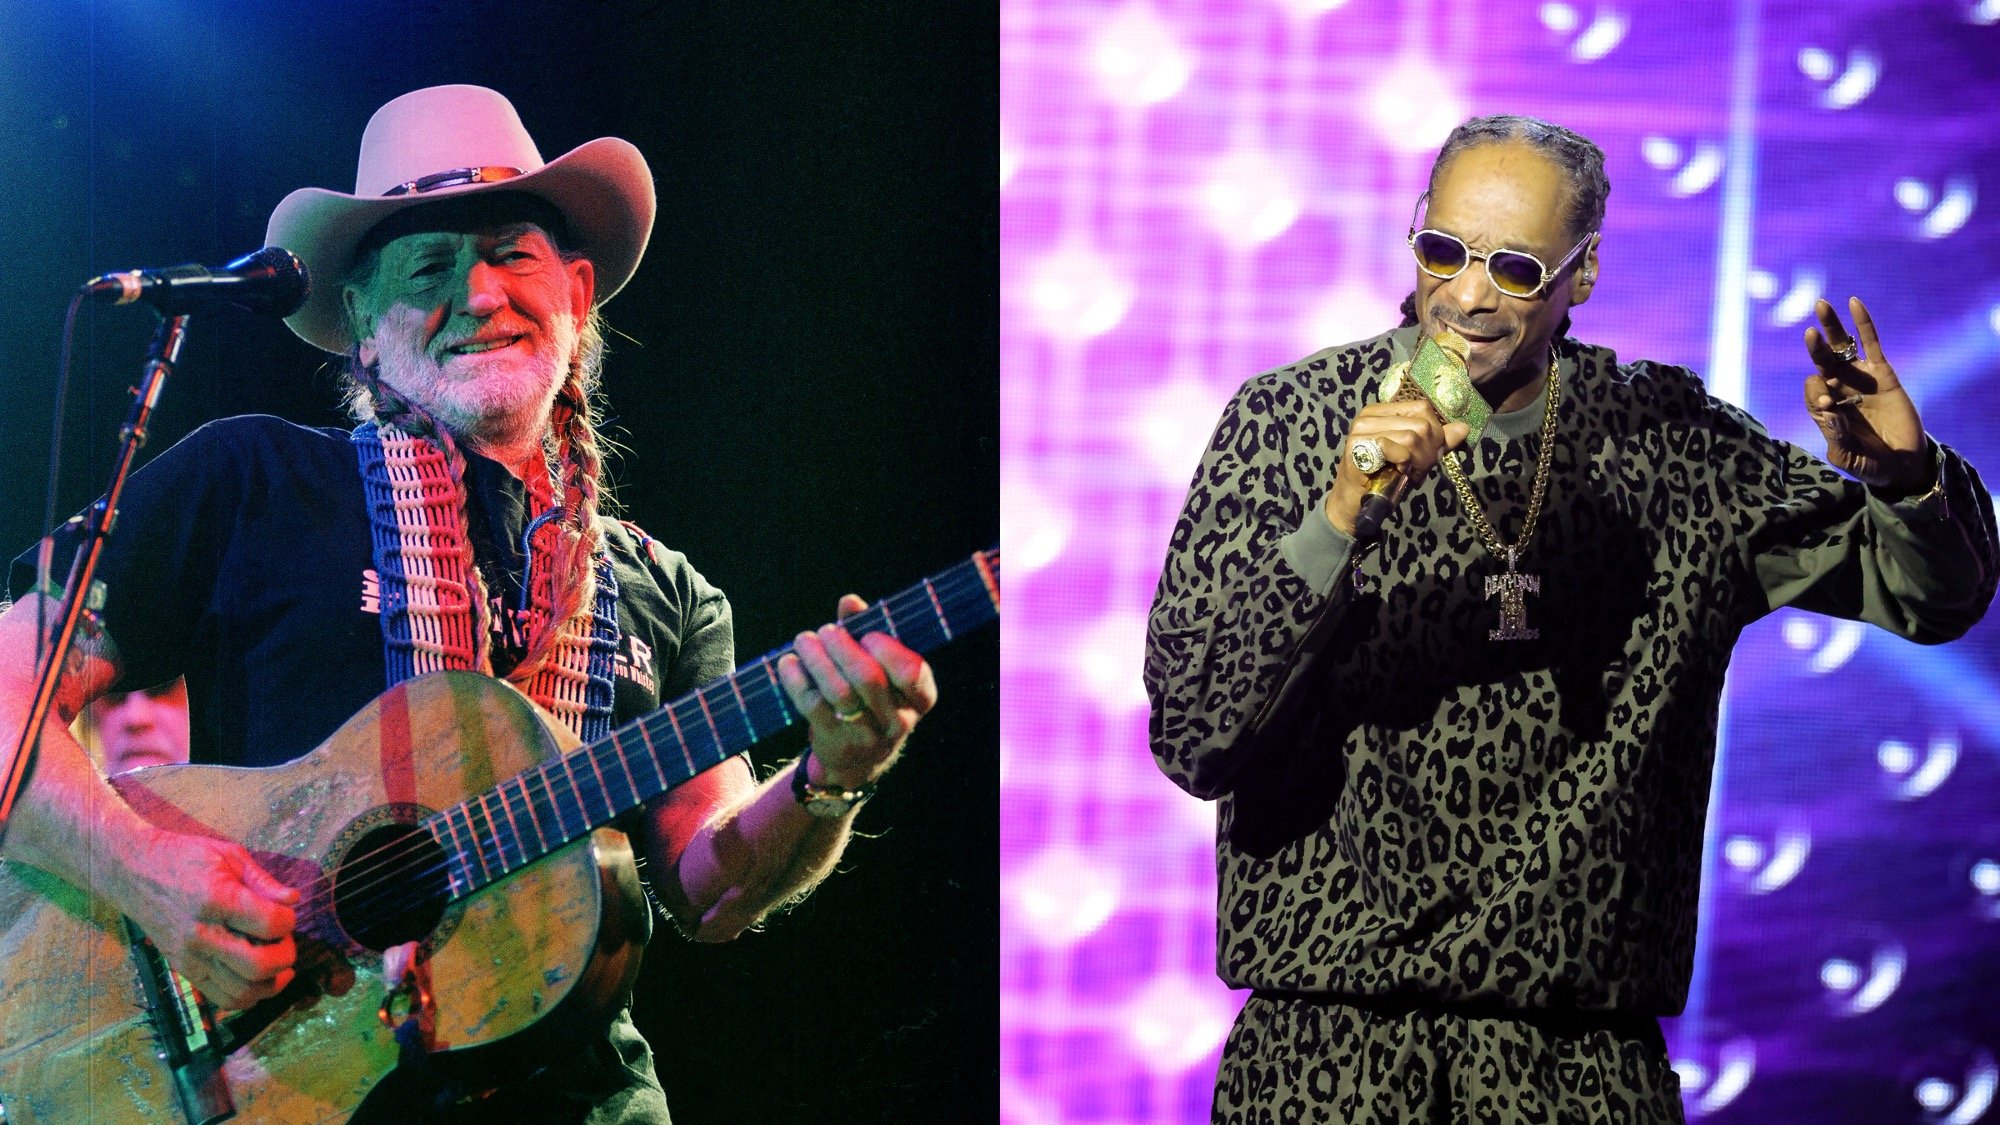 (L) Willie Nelson pictured performing at the Colorado State fair in Pueblo, Colorado on Circa 1996. (R) Snoop Dogg performs onstage during Recording Academy Honors Presented by the Black Music Collective at Hollywood Palladium on February 02, 2023.